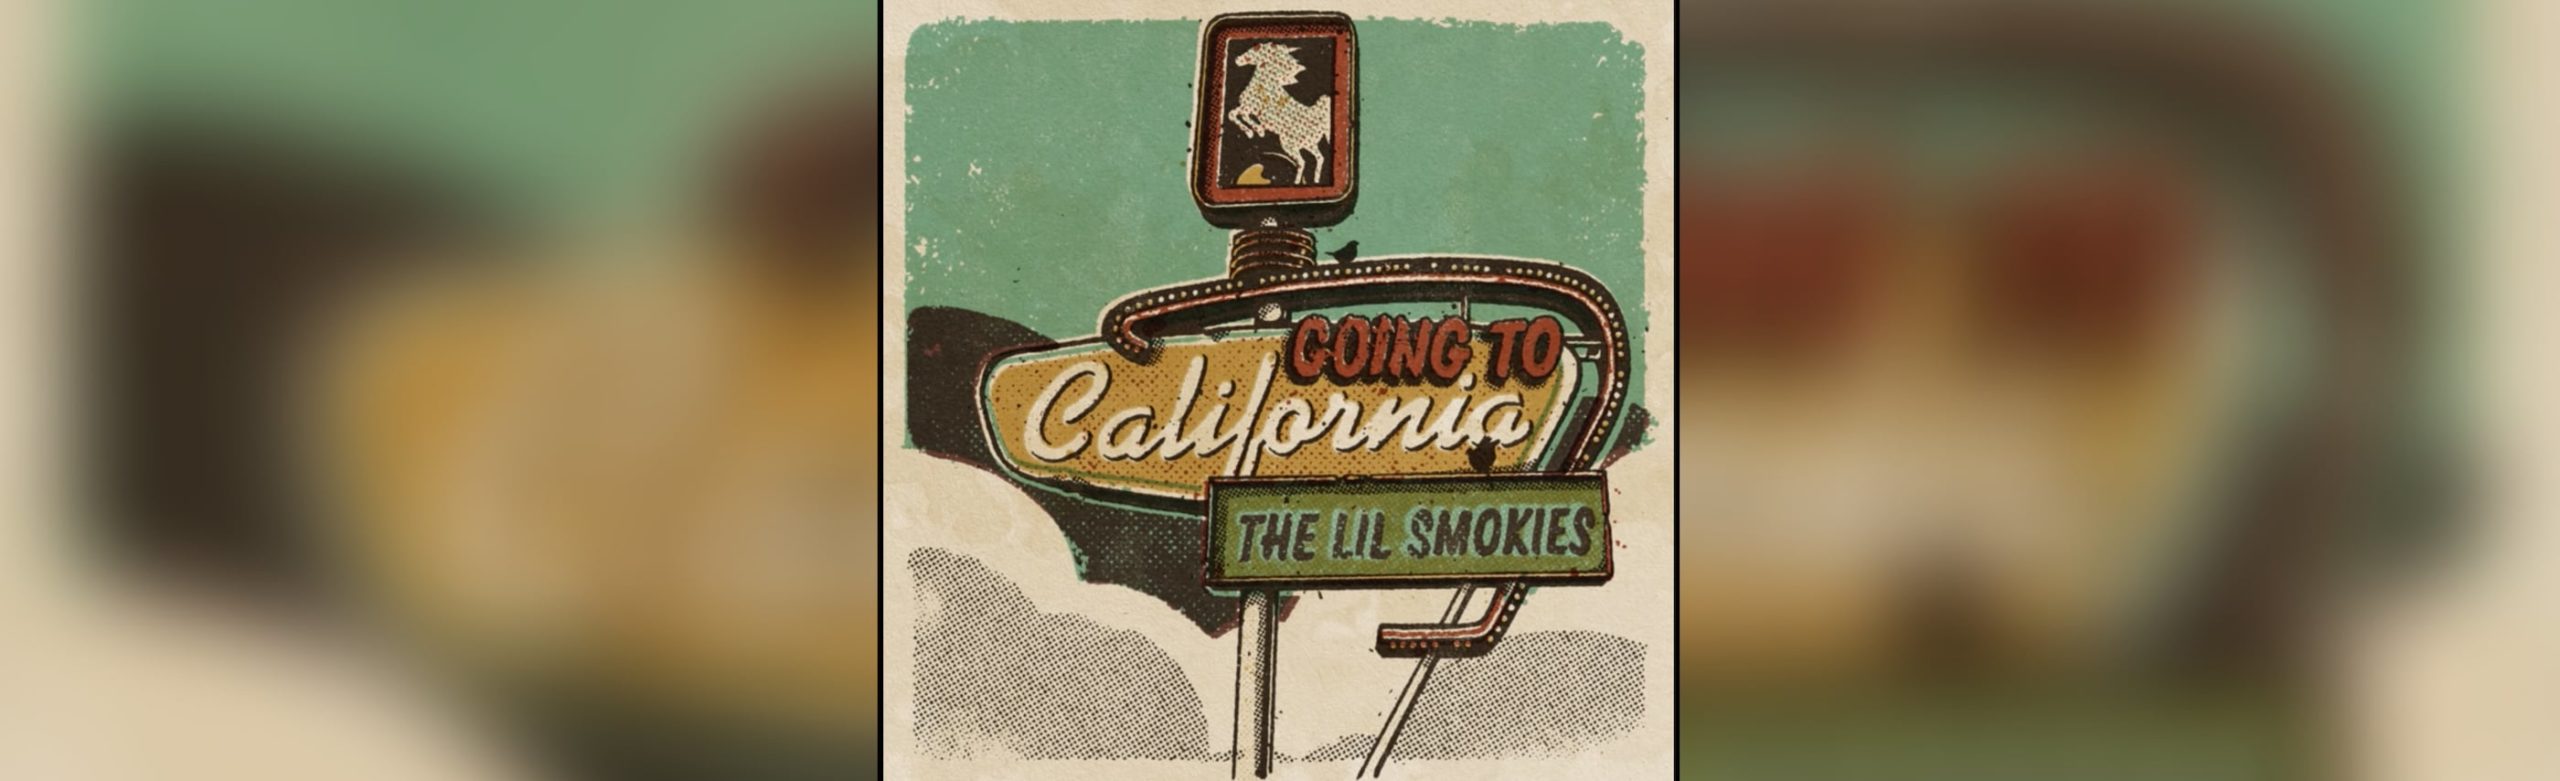 The Lil Smokies Get the Led Out with Their New Cover of “Going to California” Image